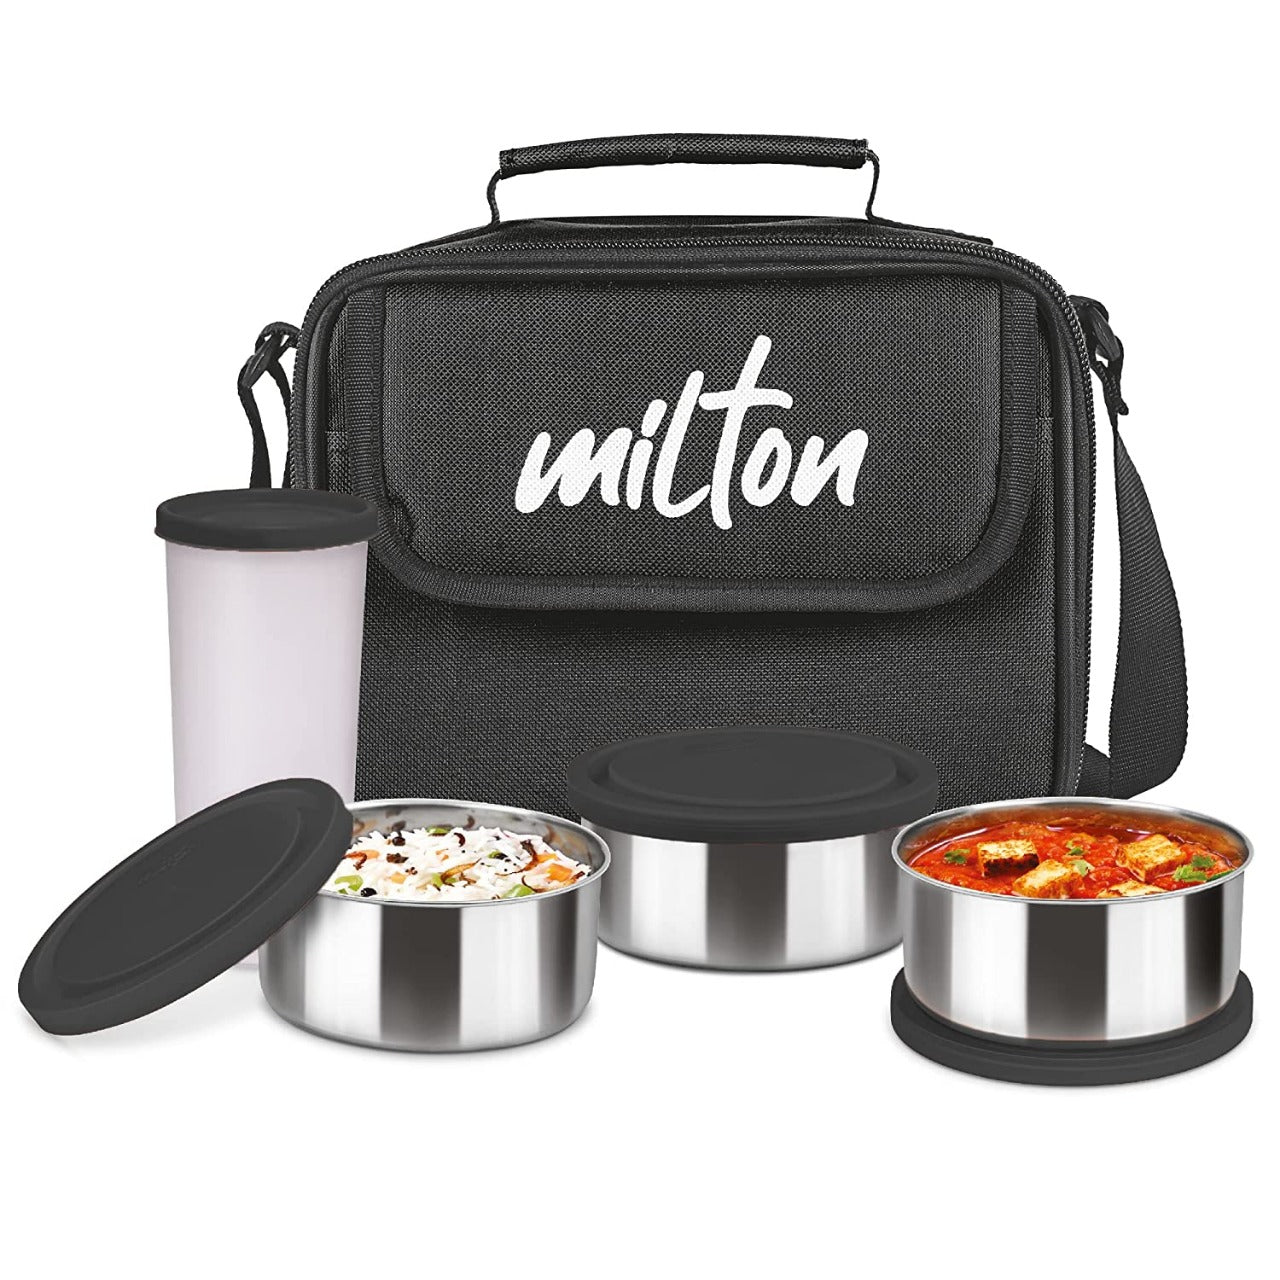 MILTON New Steel Combi Food Grade Light Weight Dishwasher Safe Easy to Carry Leak Proof Lunch Box, Pack of 5